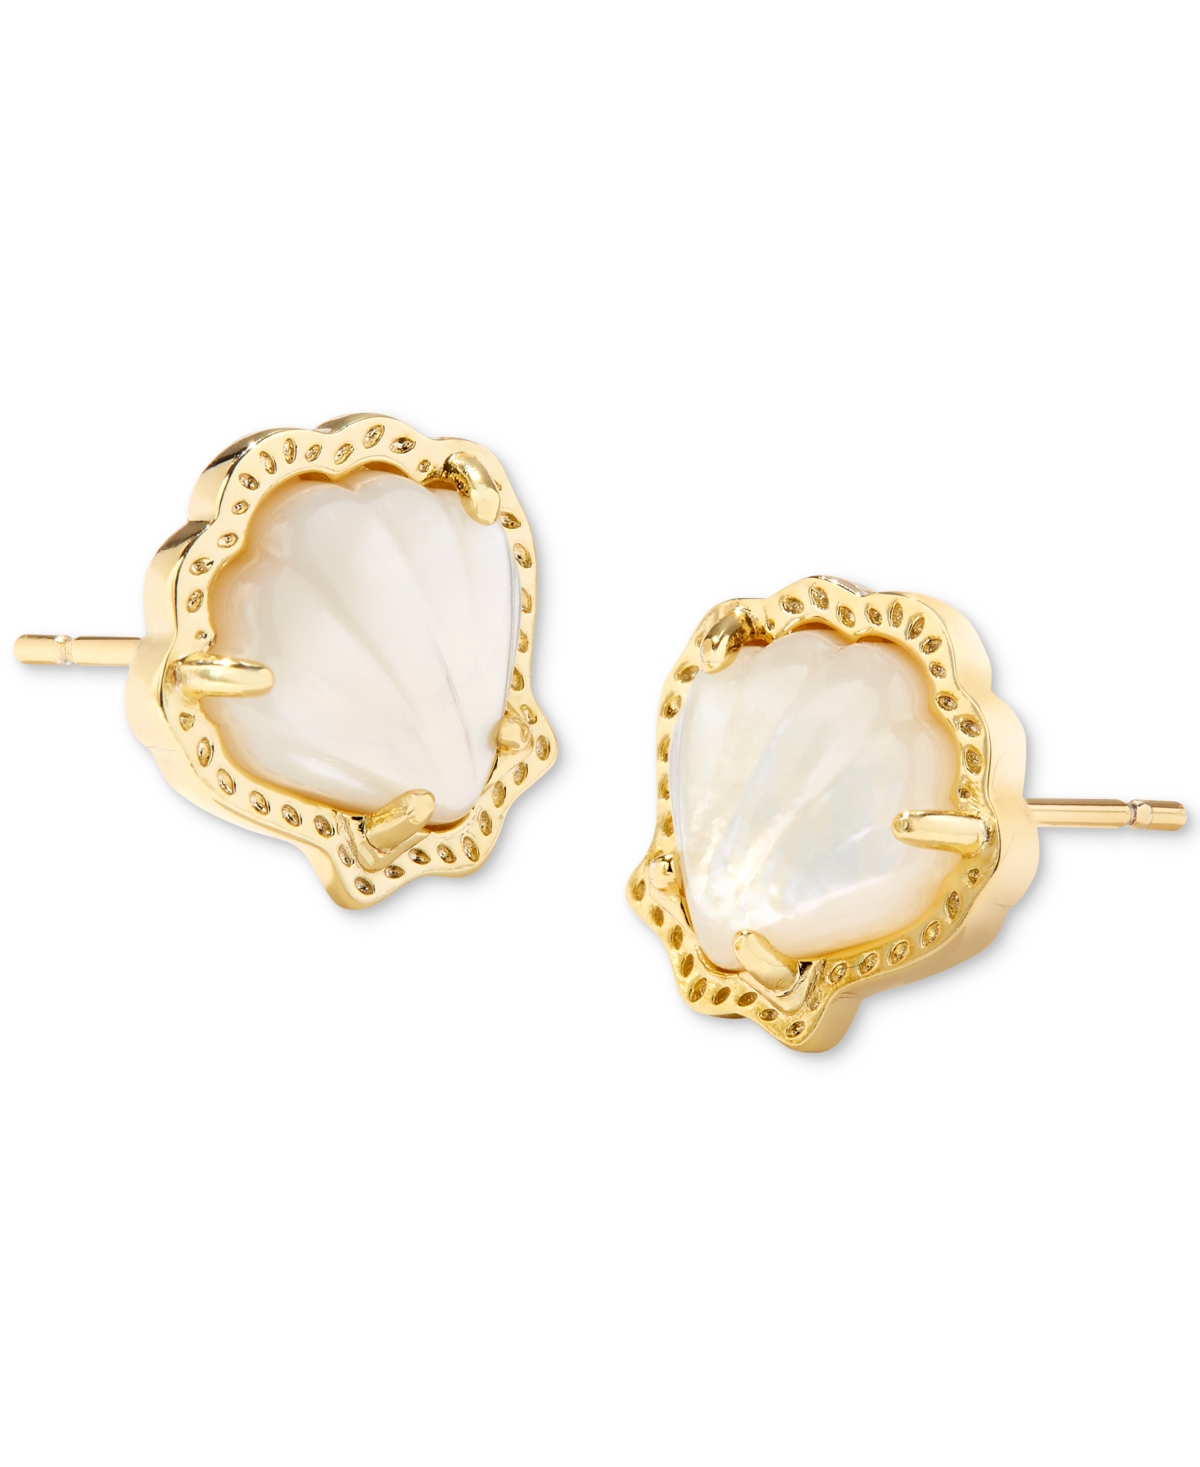 14k Gold-Plated Stone Shell Stud Earrings - Gold Blush